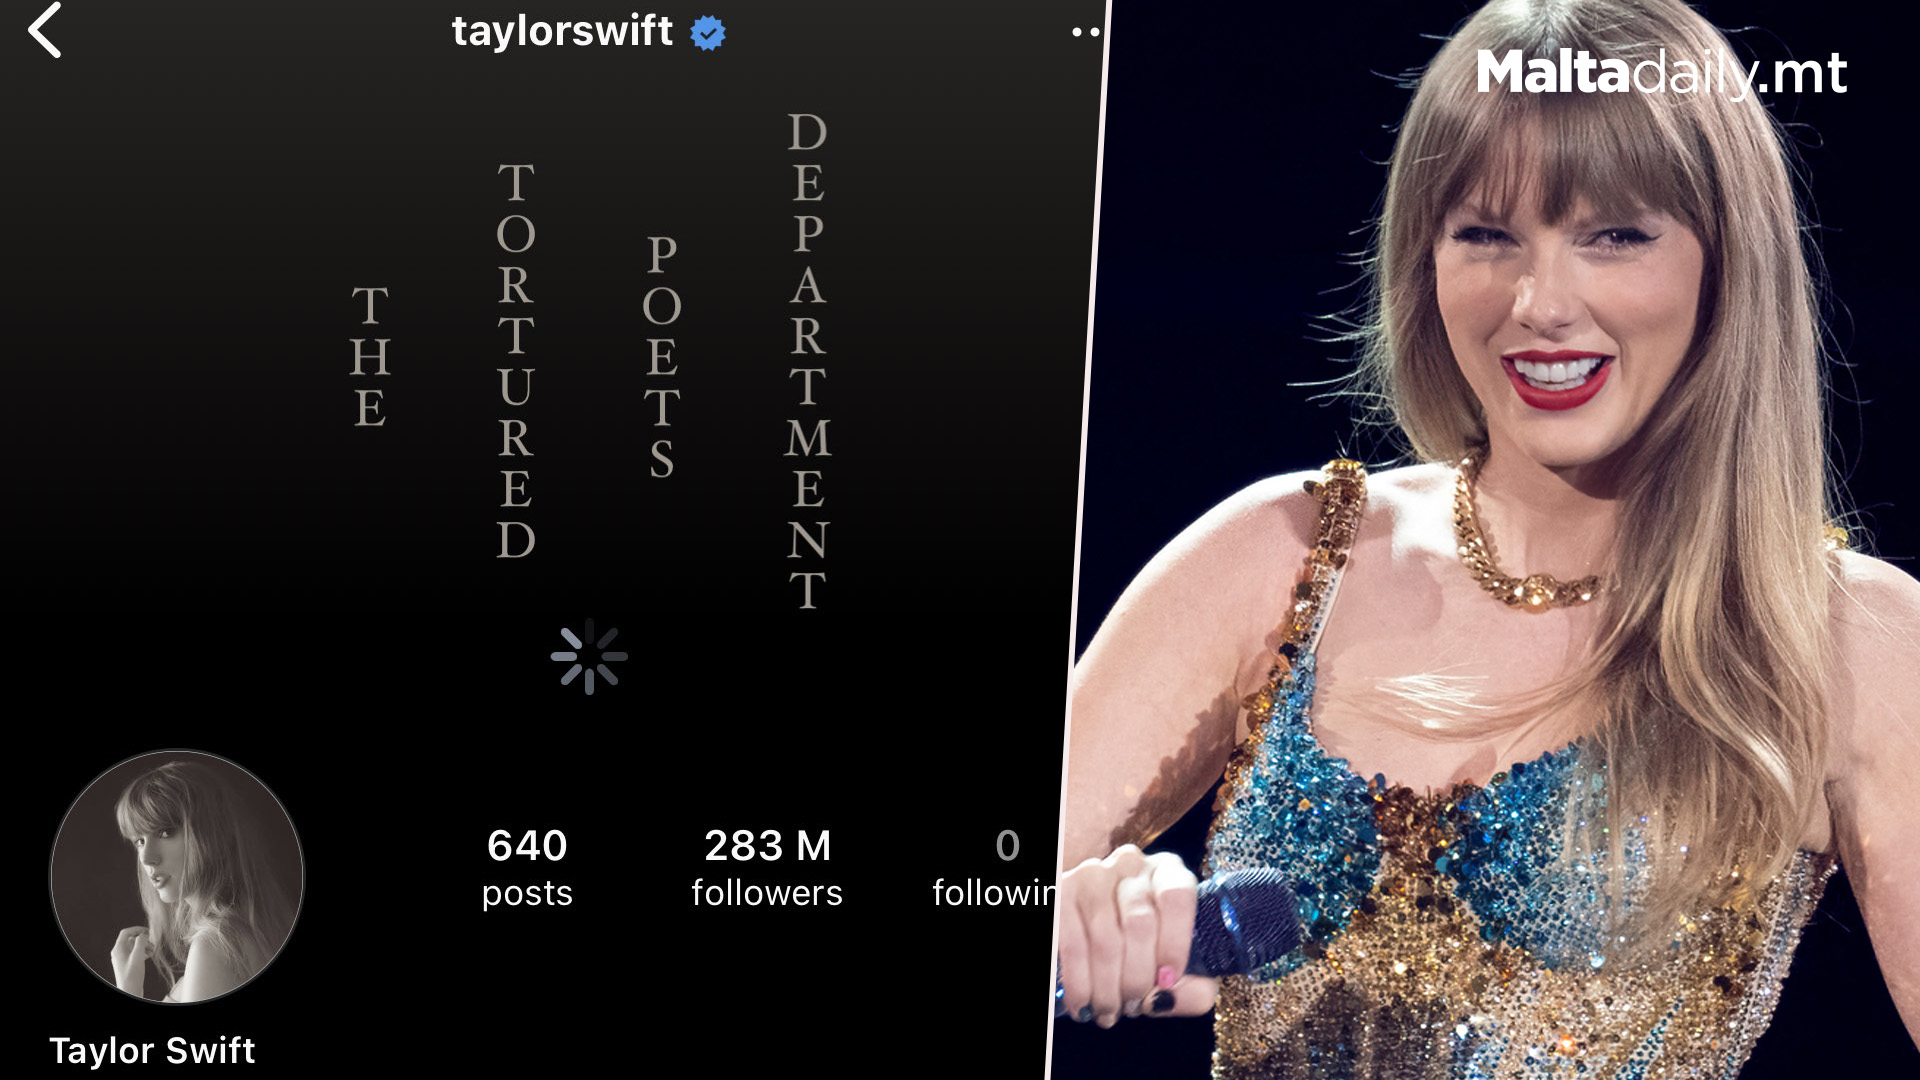 What Happens If You Refresh Taylor Swift's Instagram Page?